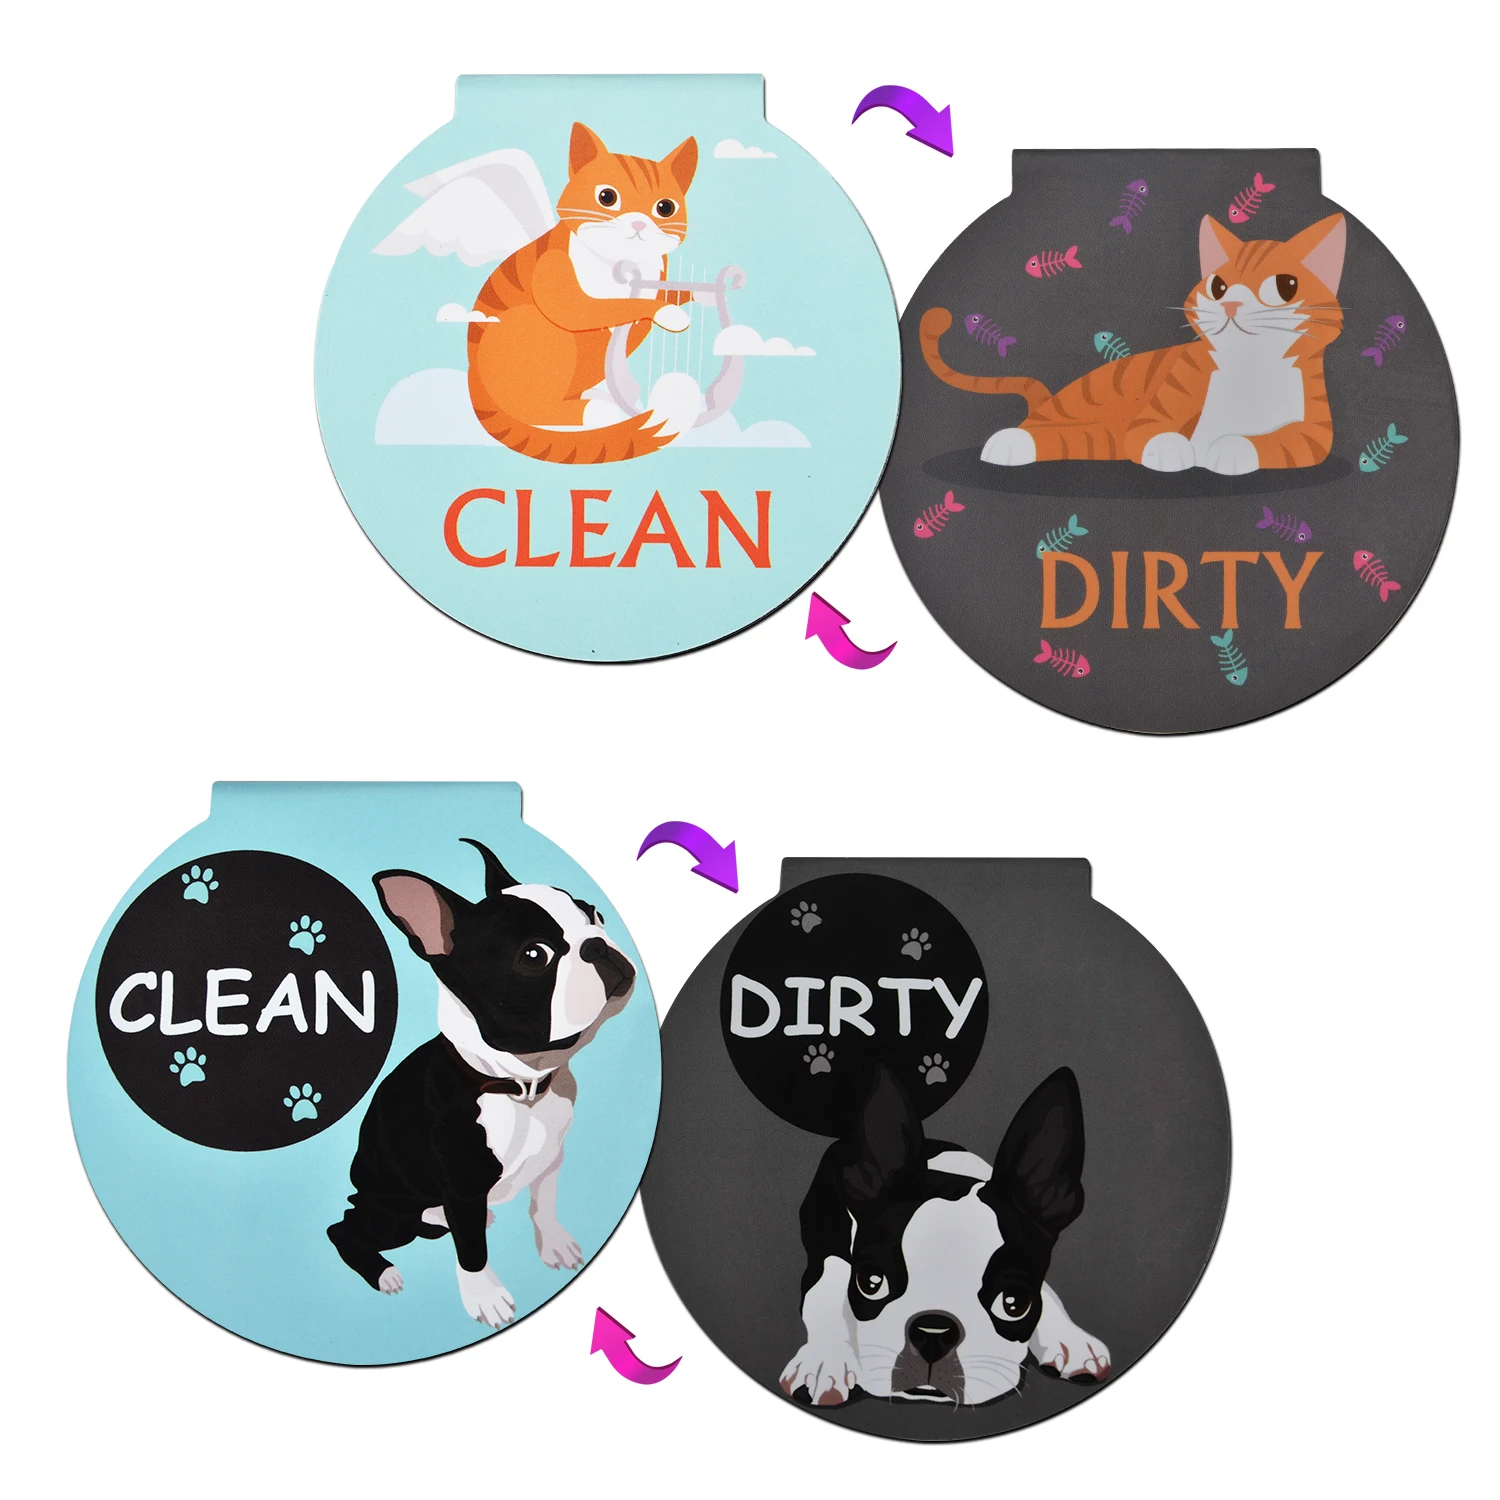 9*8cm Cute cat dog double sided soft magnet "CLEAN DIRTY" sign magnetic sticker for refrigerator dishwasher washing machine